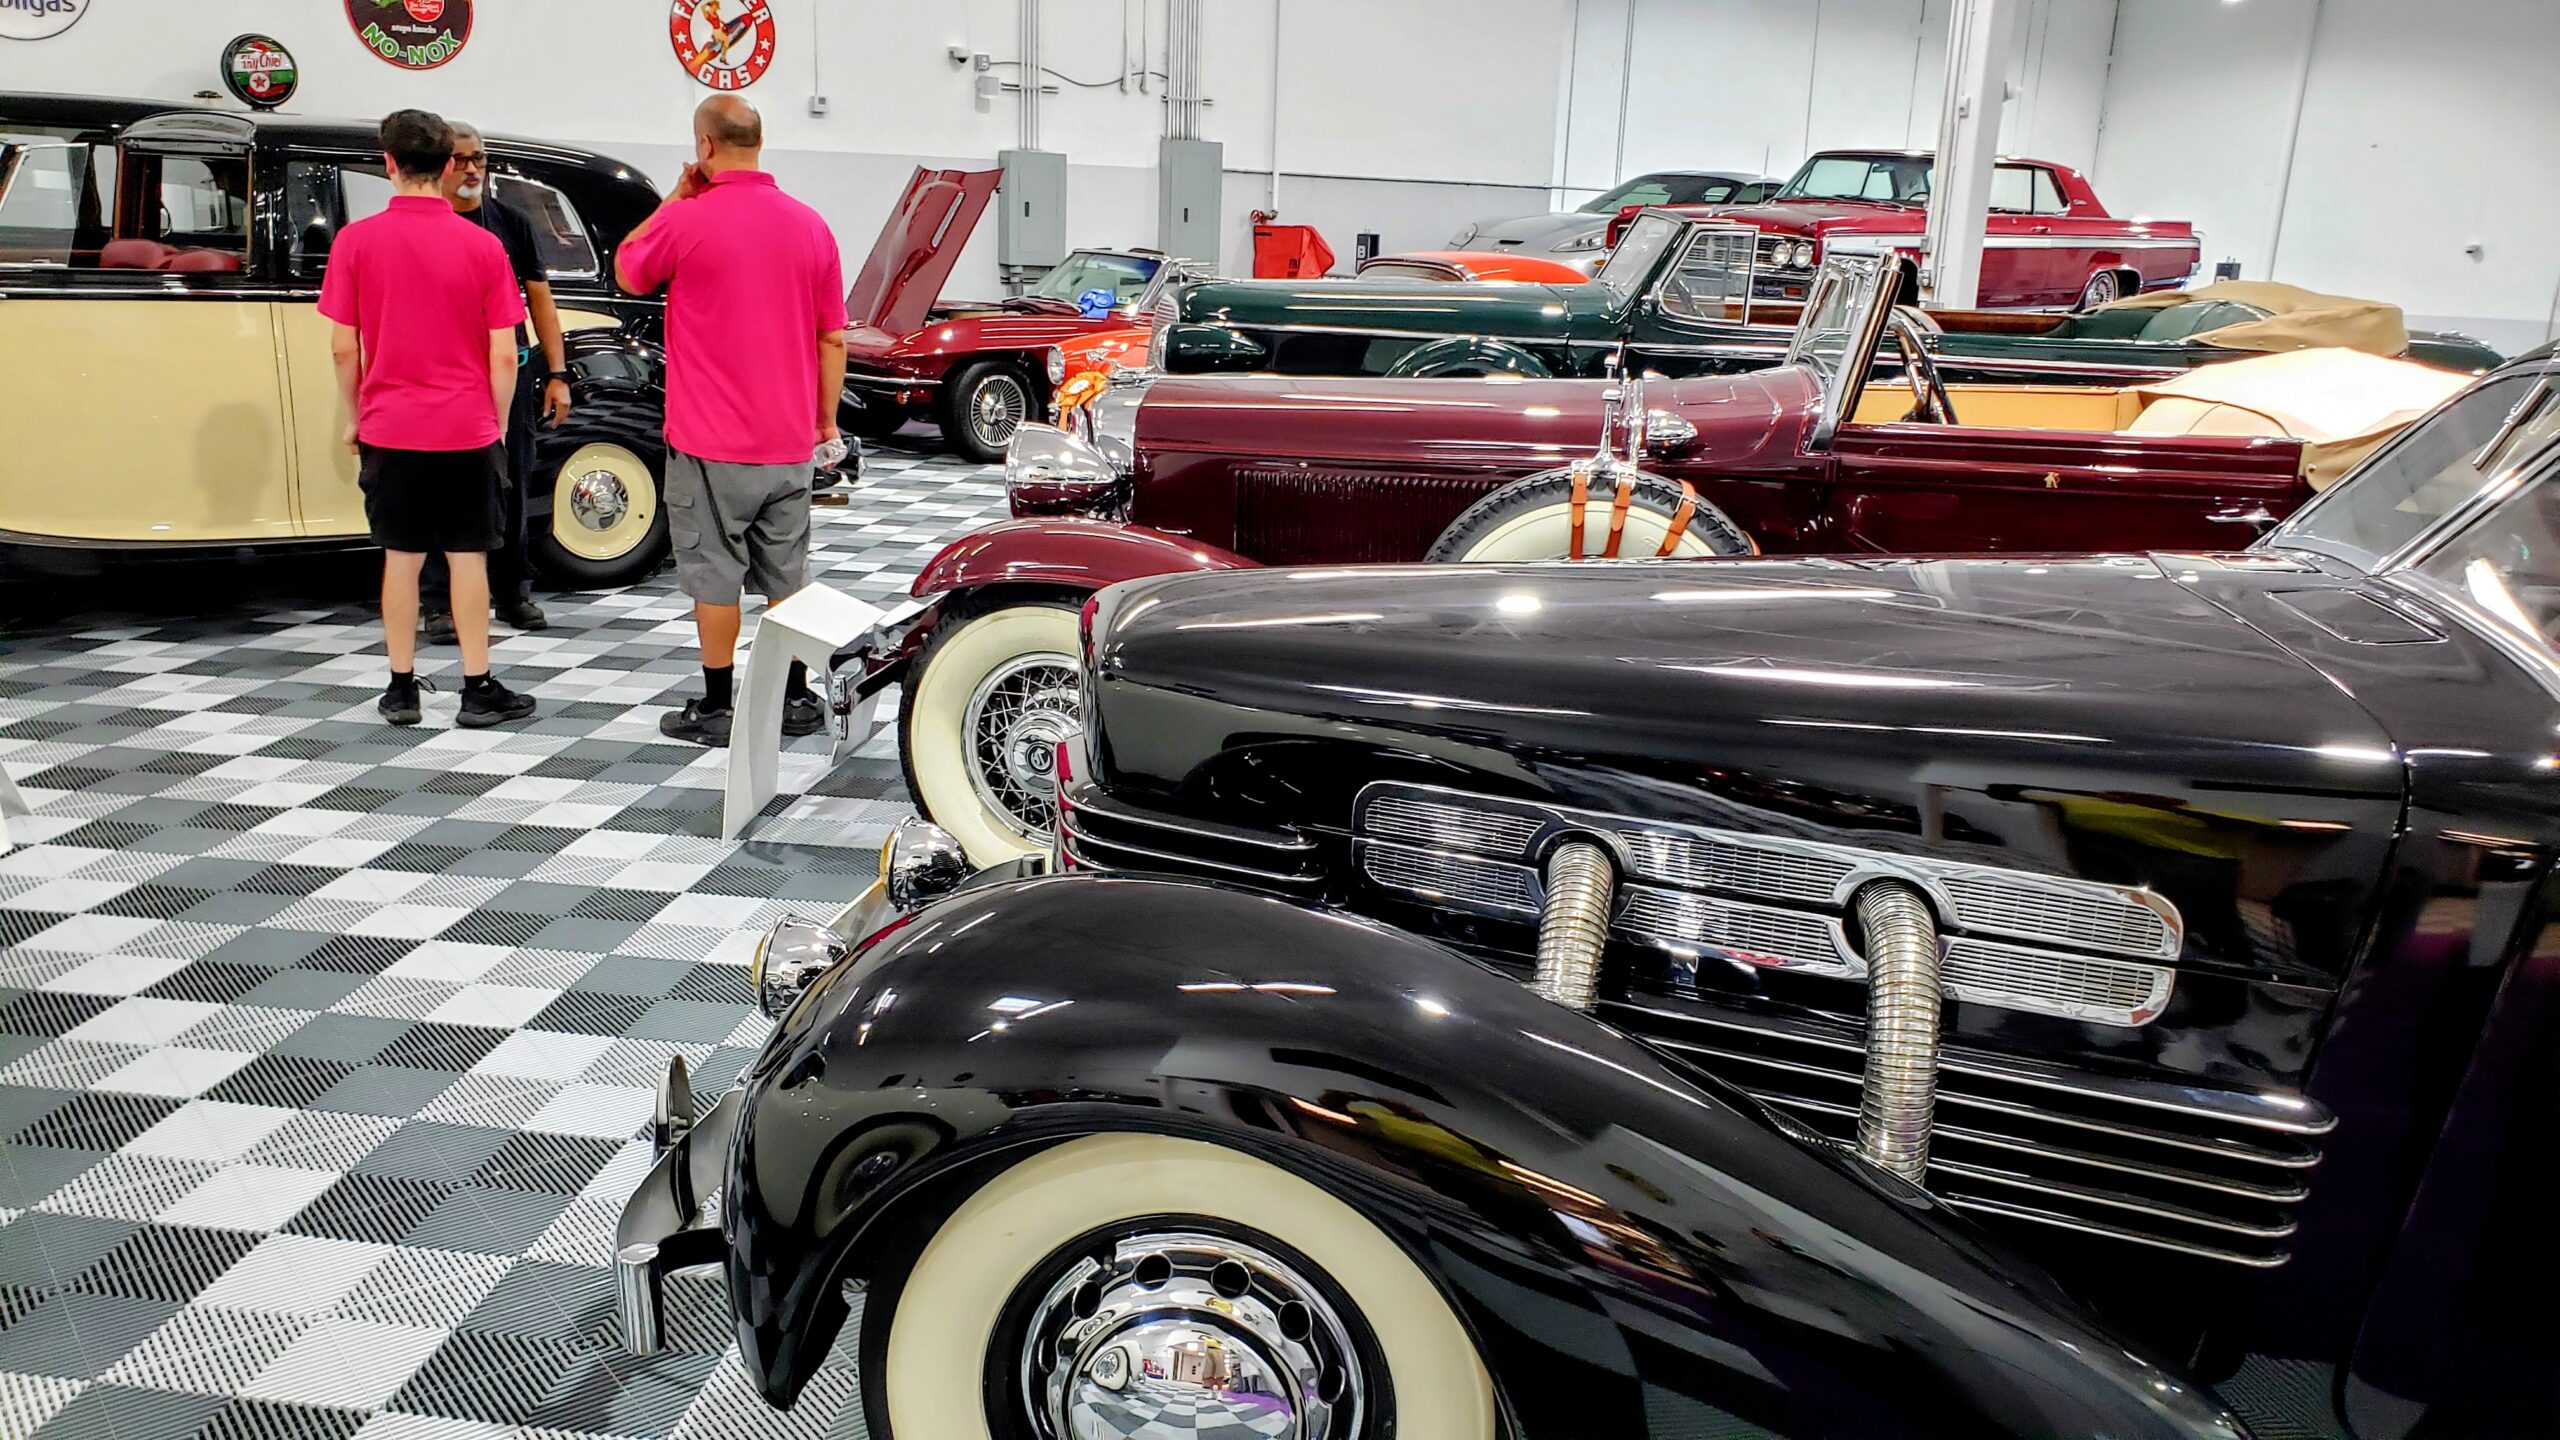 Indoor Collectible Cars Are Stored